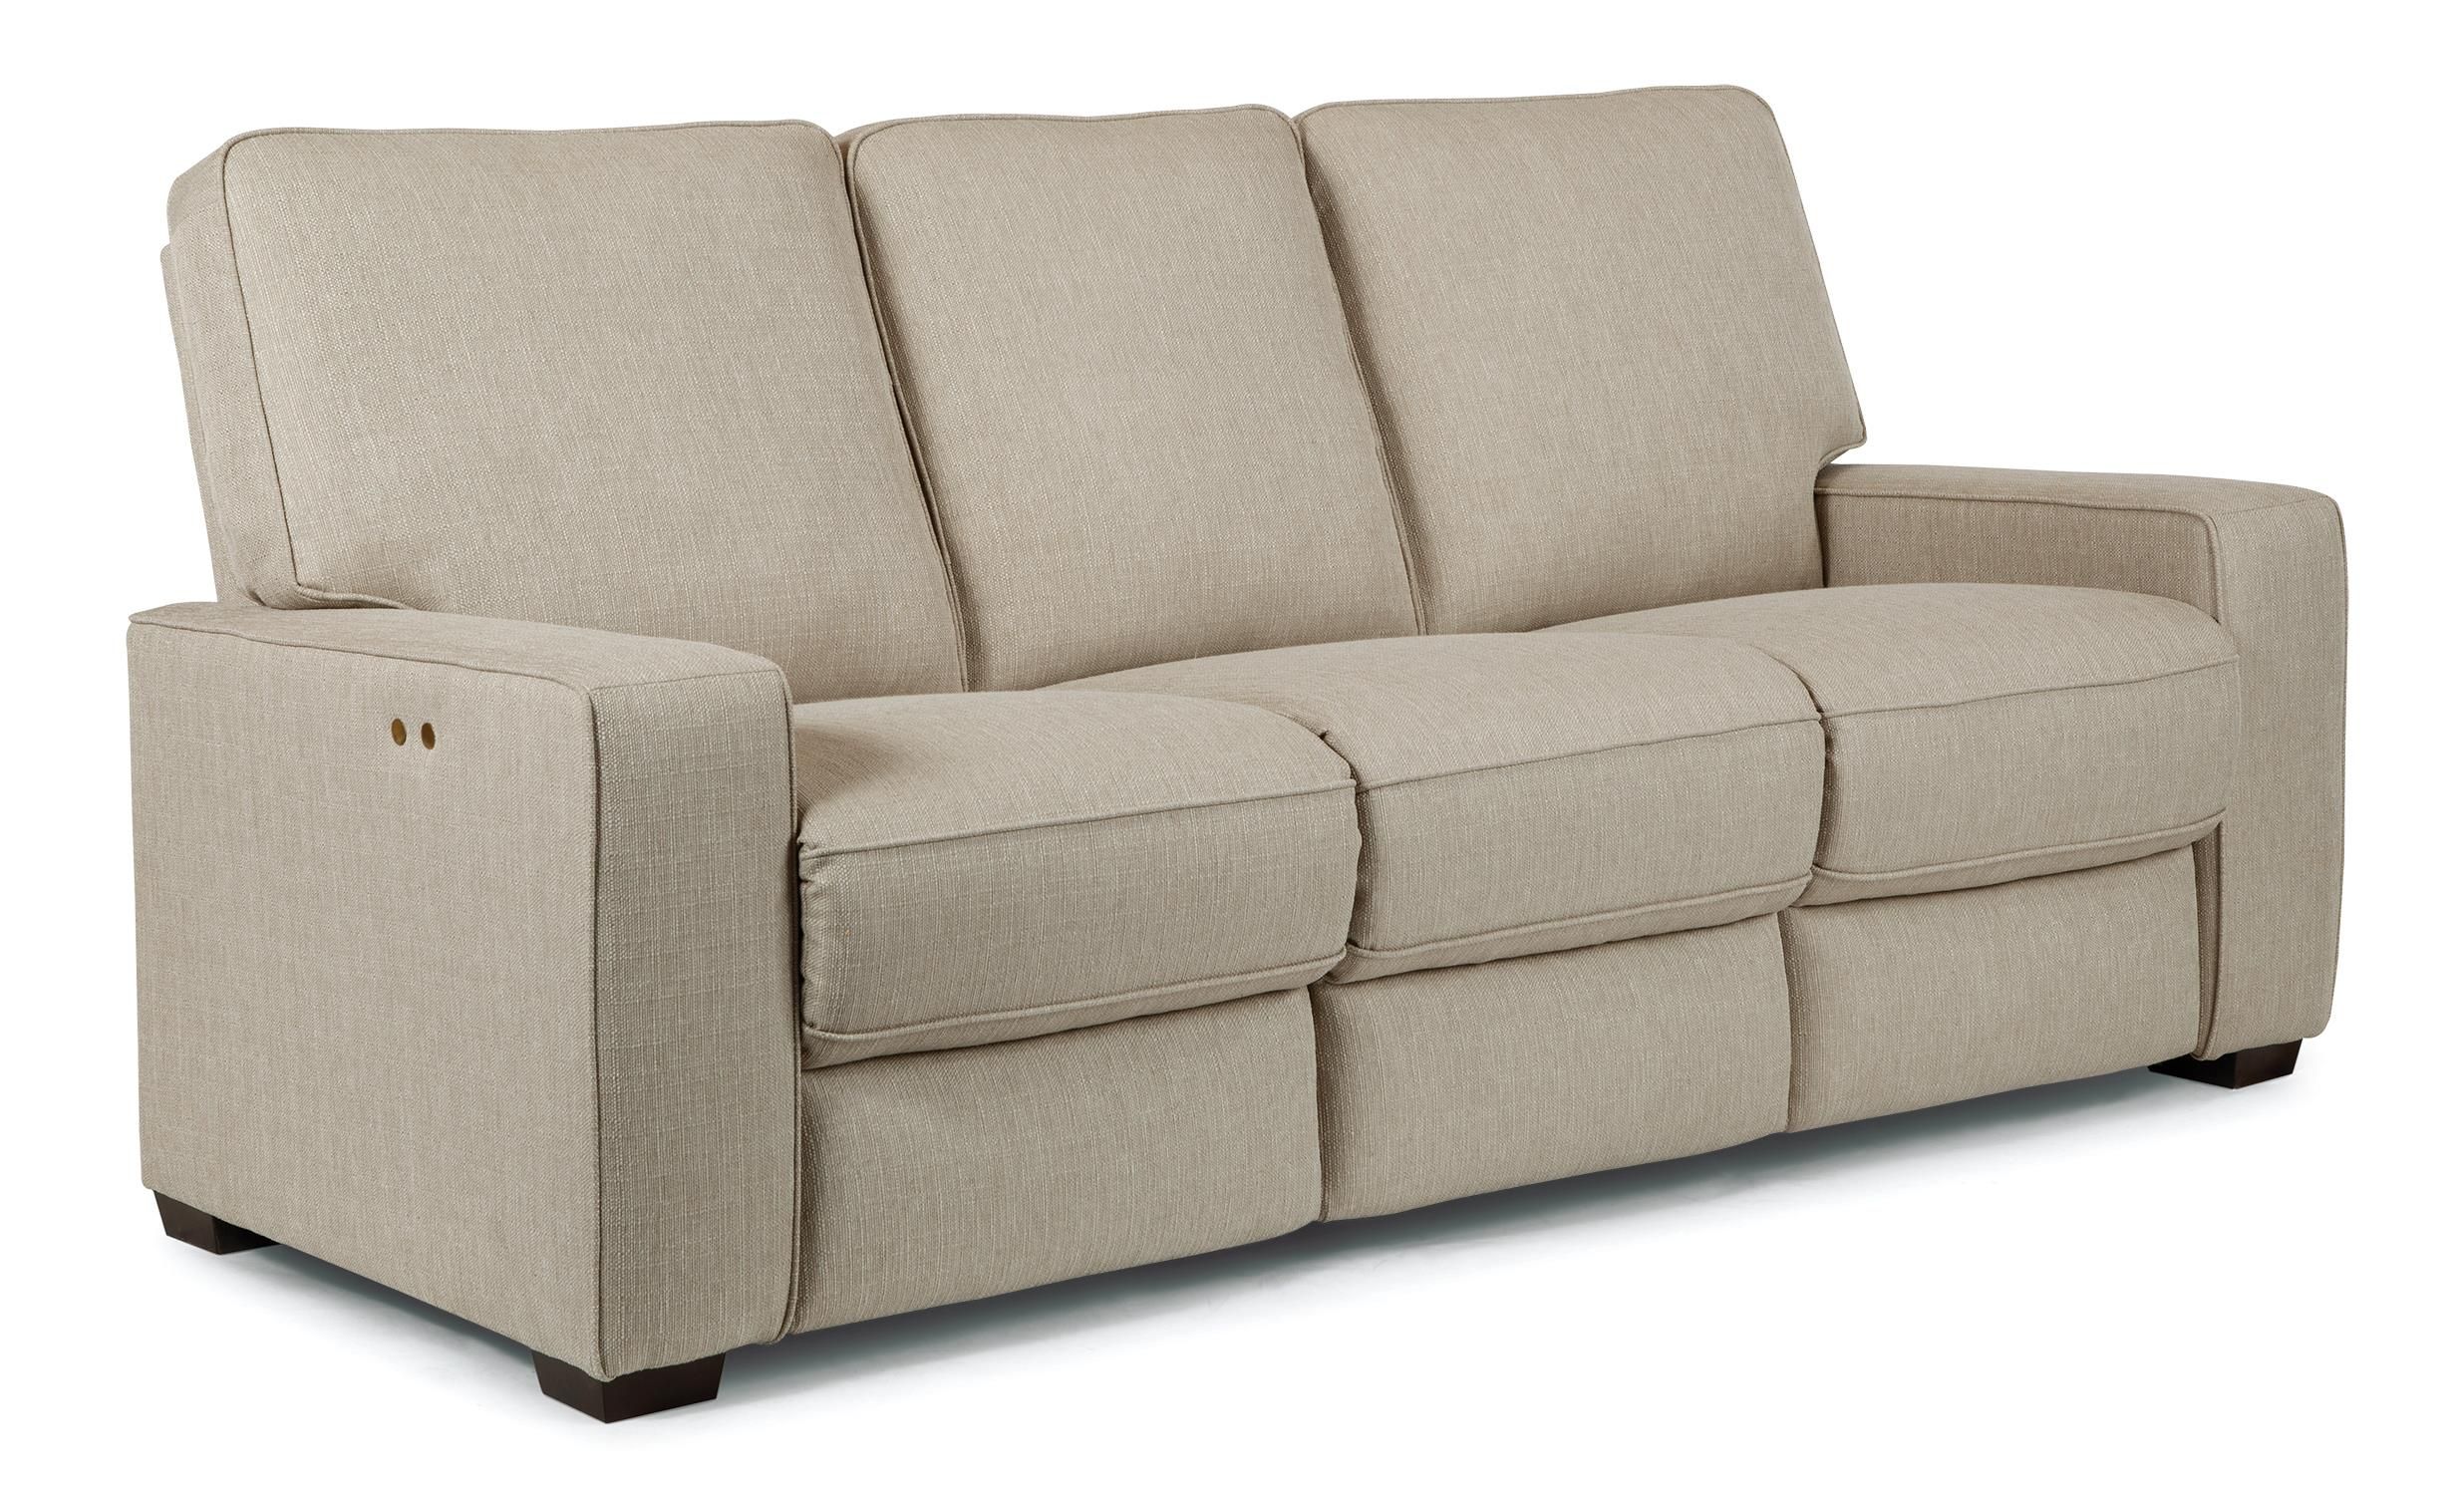 Best Home Furnishings Celena Contemporary Power Reclining Sofa Within Recliner Sofa Chairs (View 9 of 15)